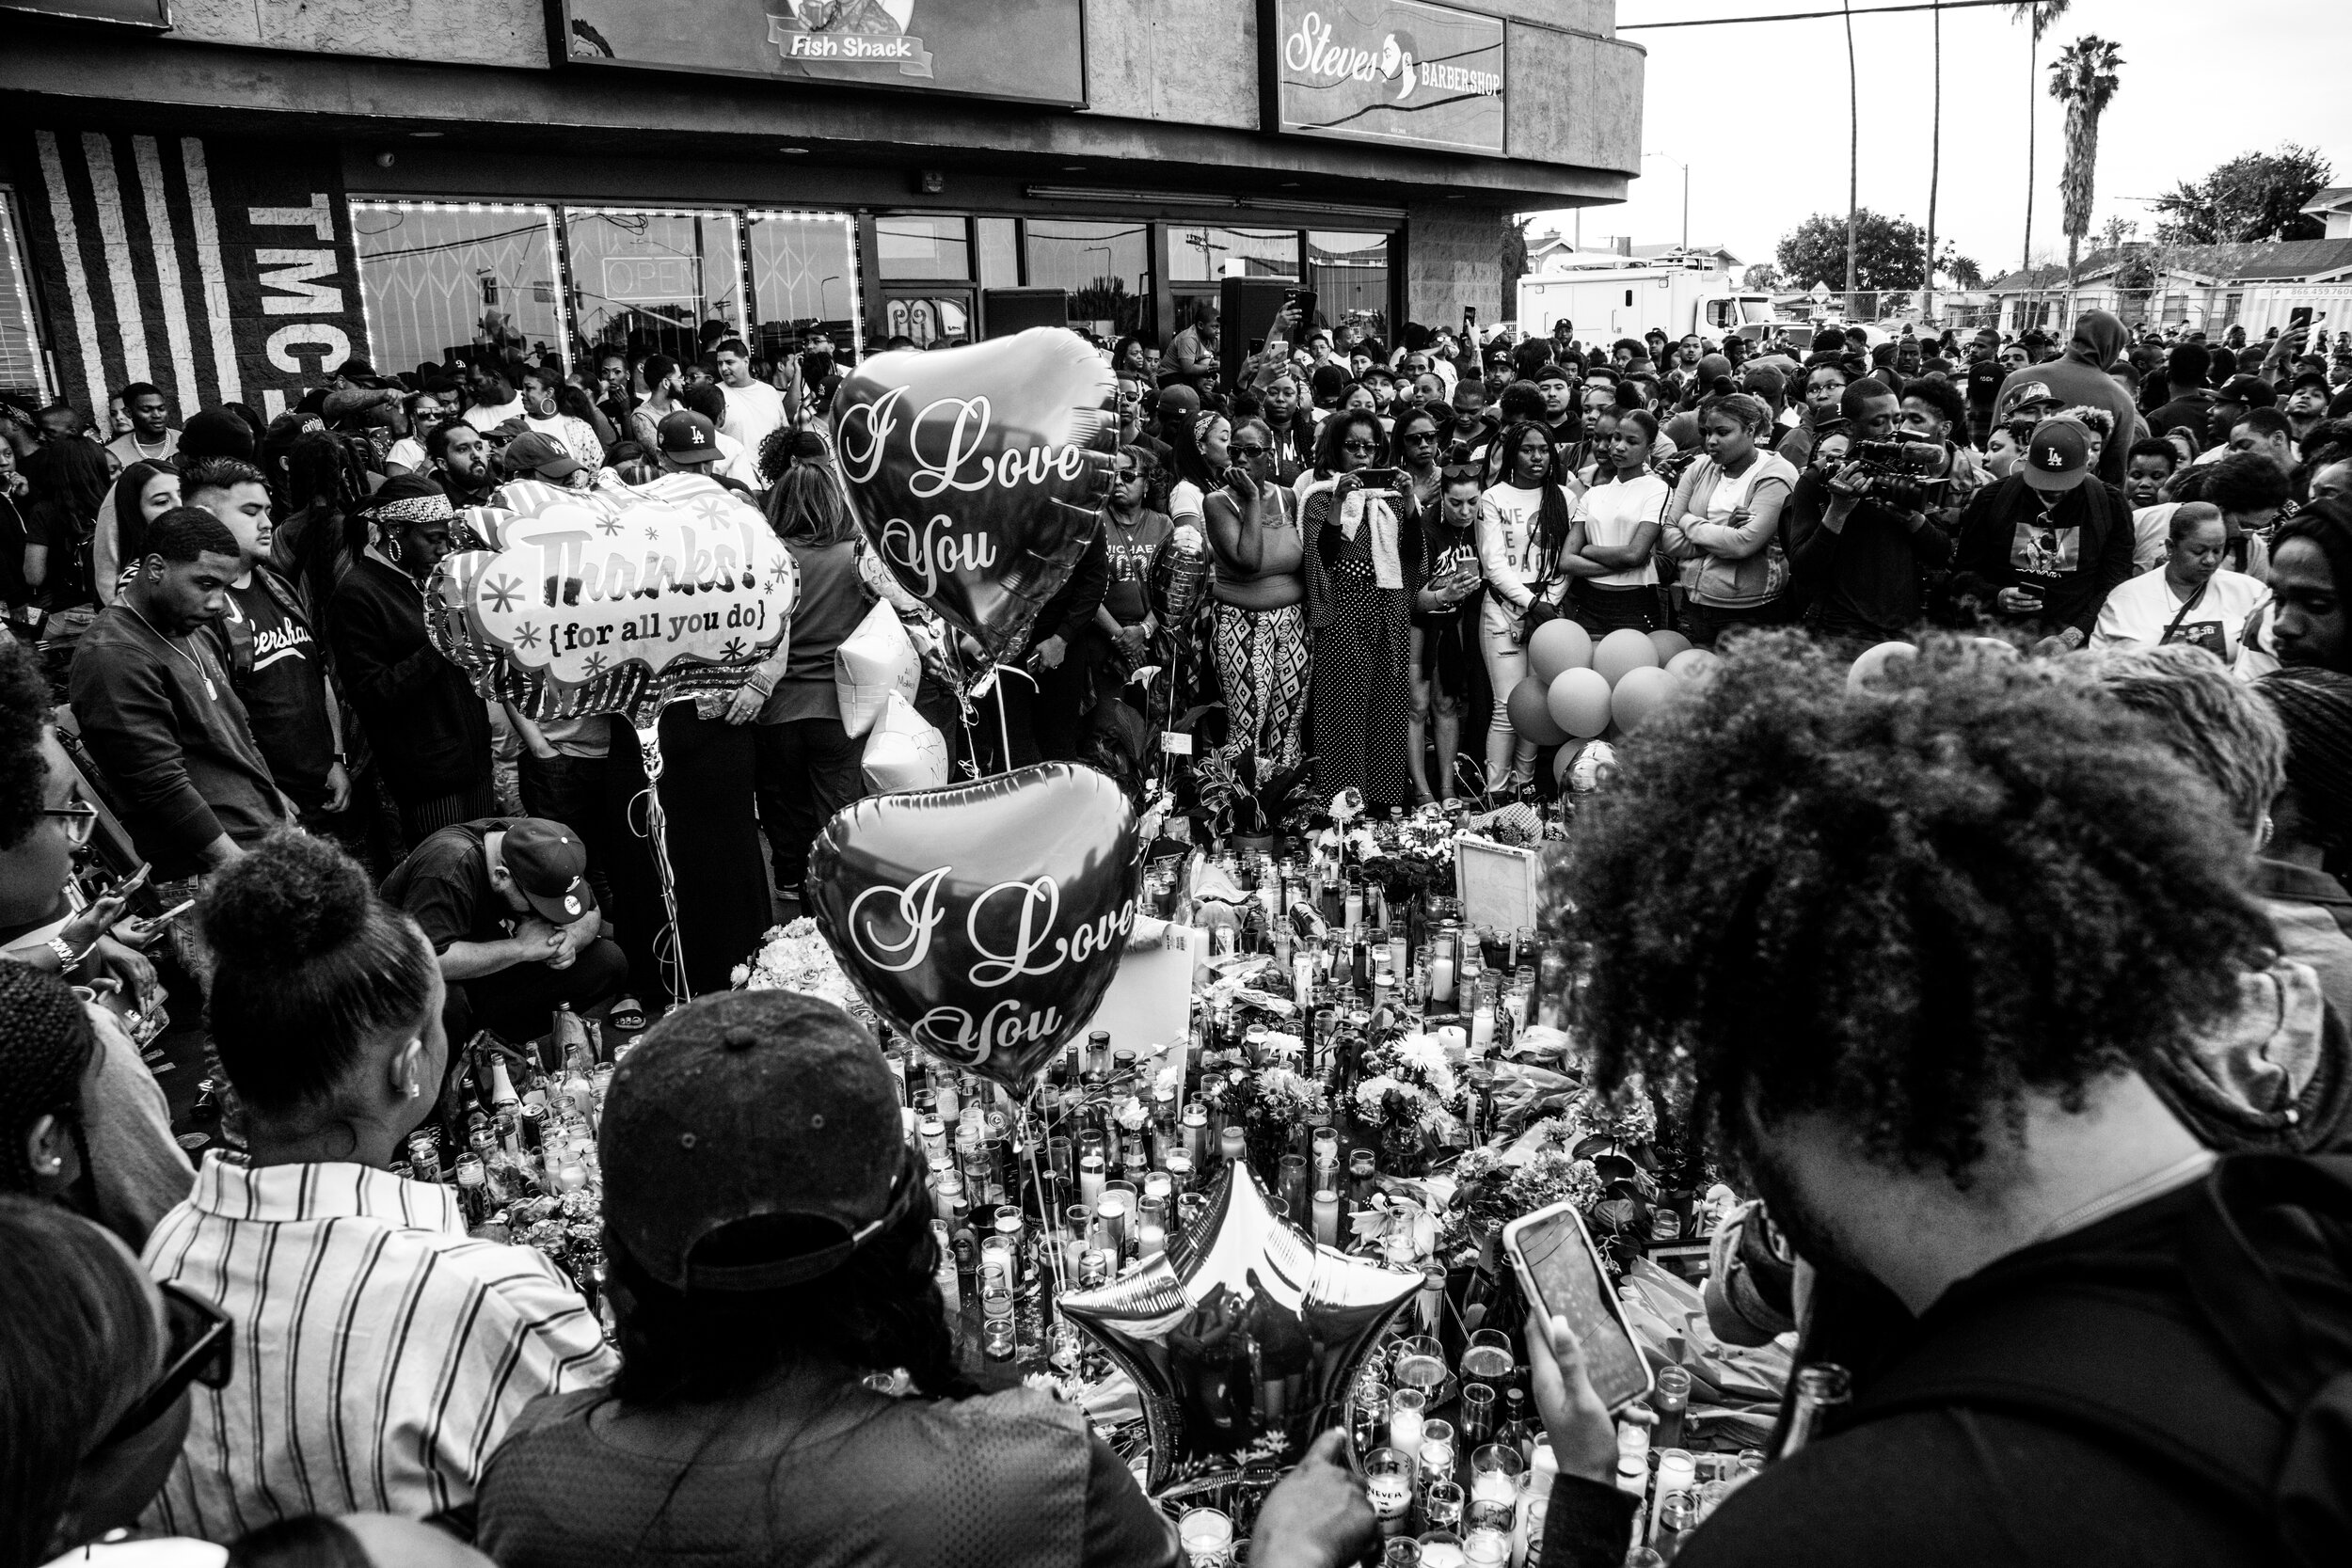  Fans and community members gather at The Marathon Clothing Store, on Slauson and Crenshaw, now named Nipsey Hussle Square, the day after he was slain at that location.  